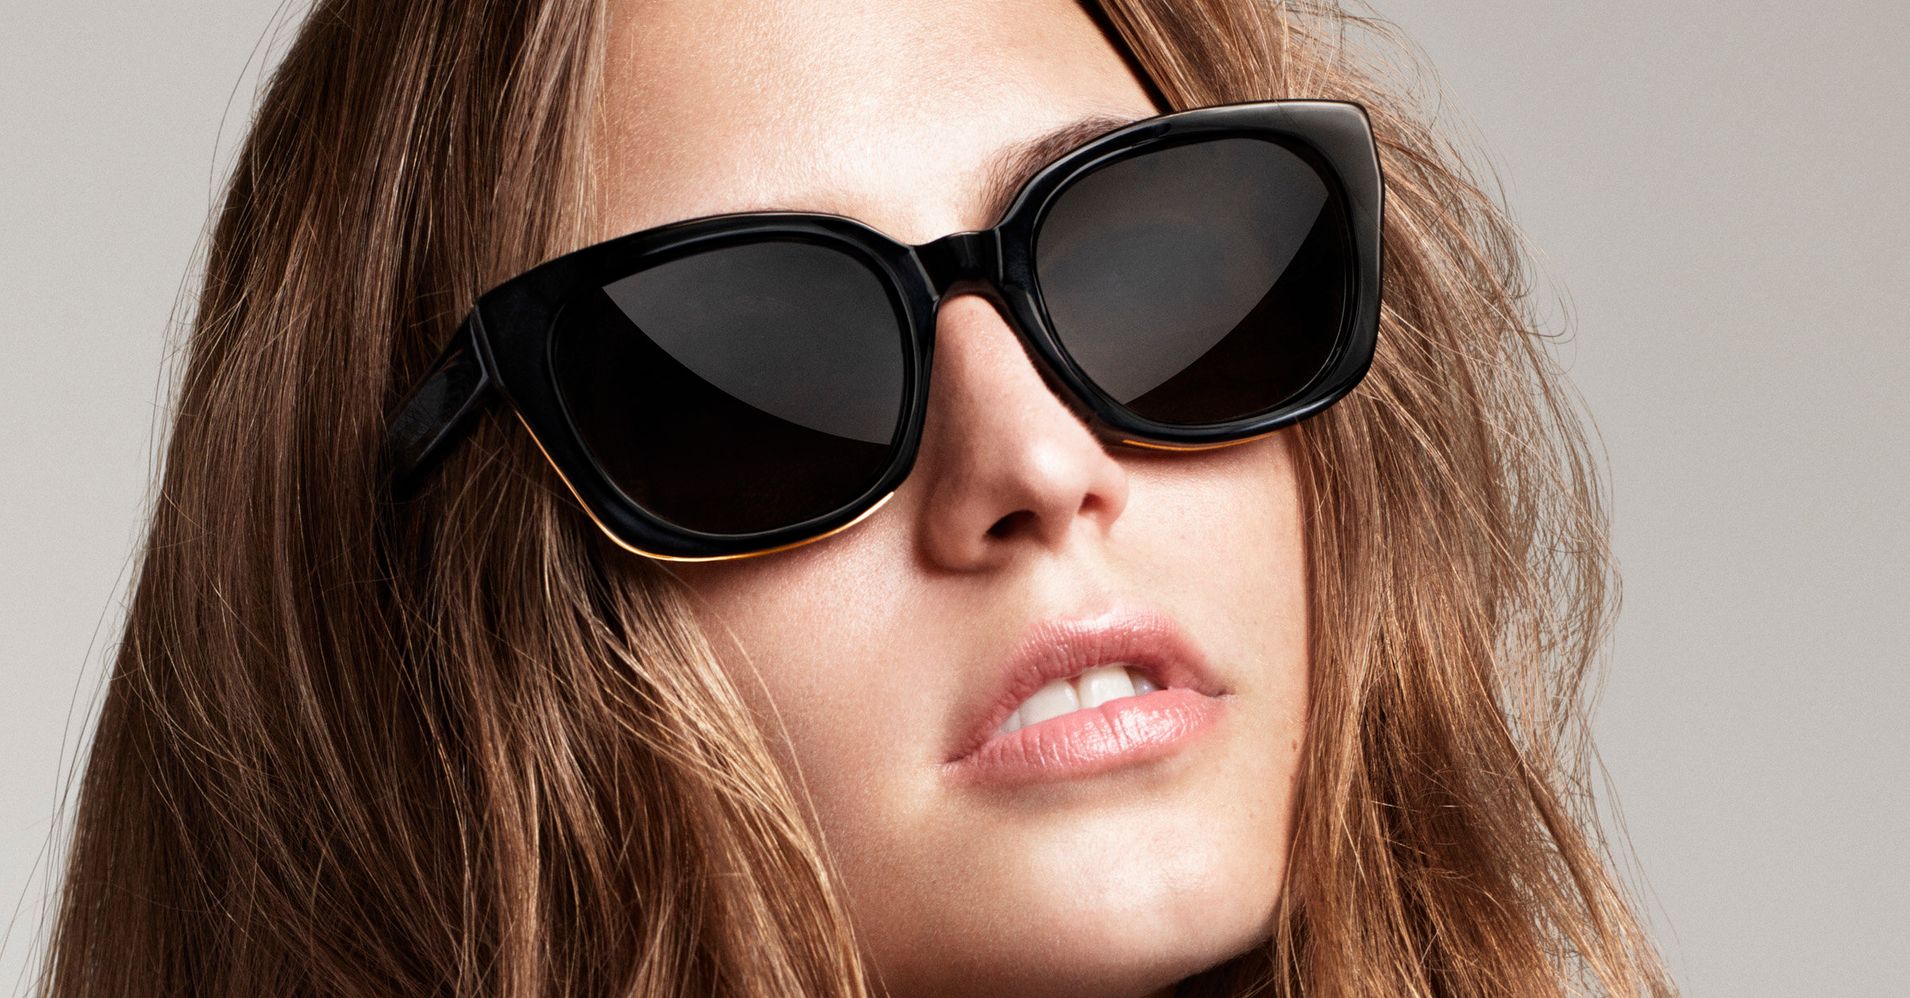 Take A Look At Warby Parker's Newest Line Of Sunglasses | HuffPost